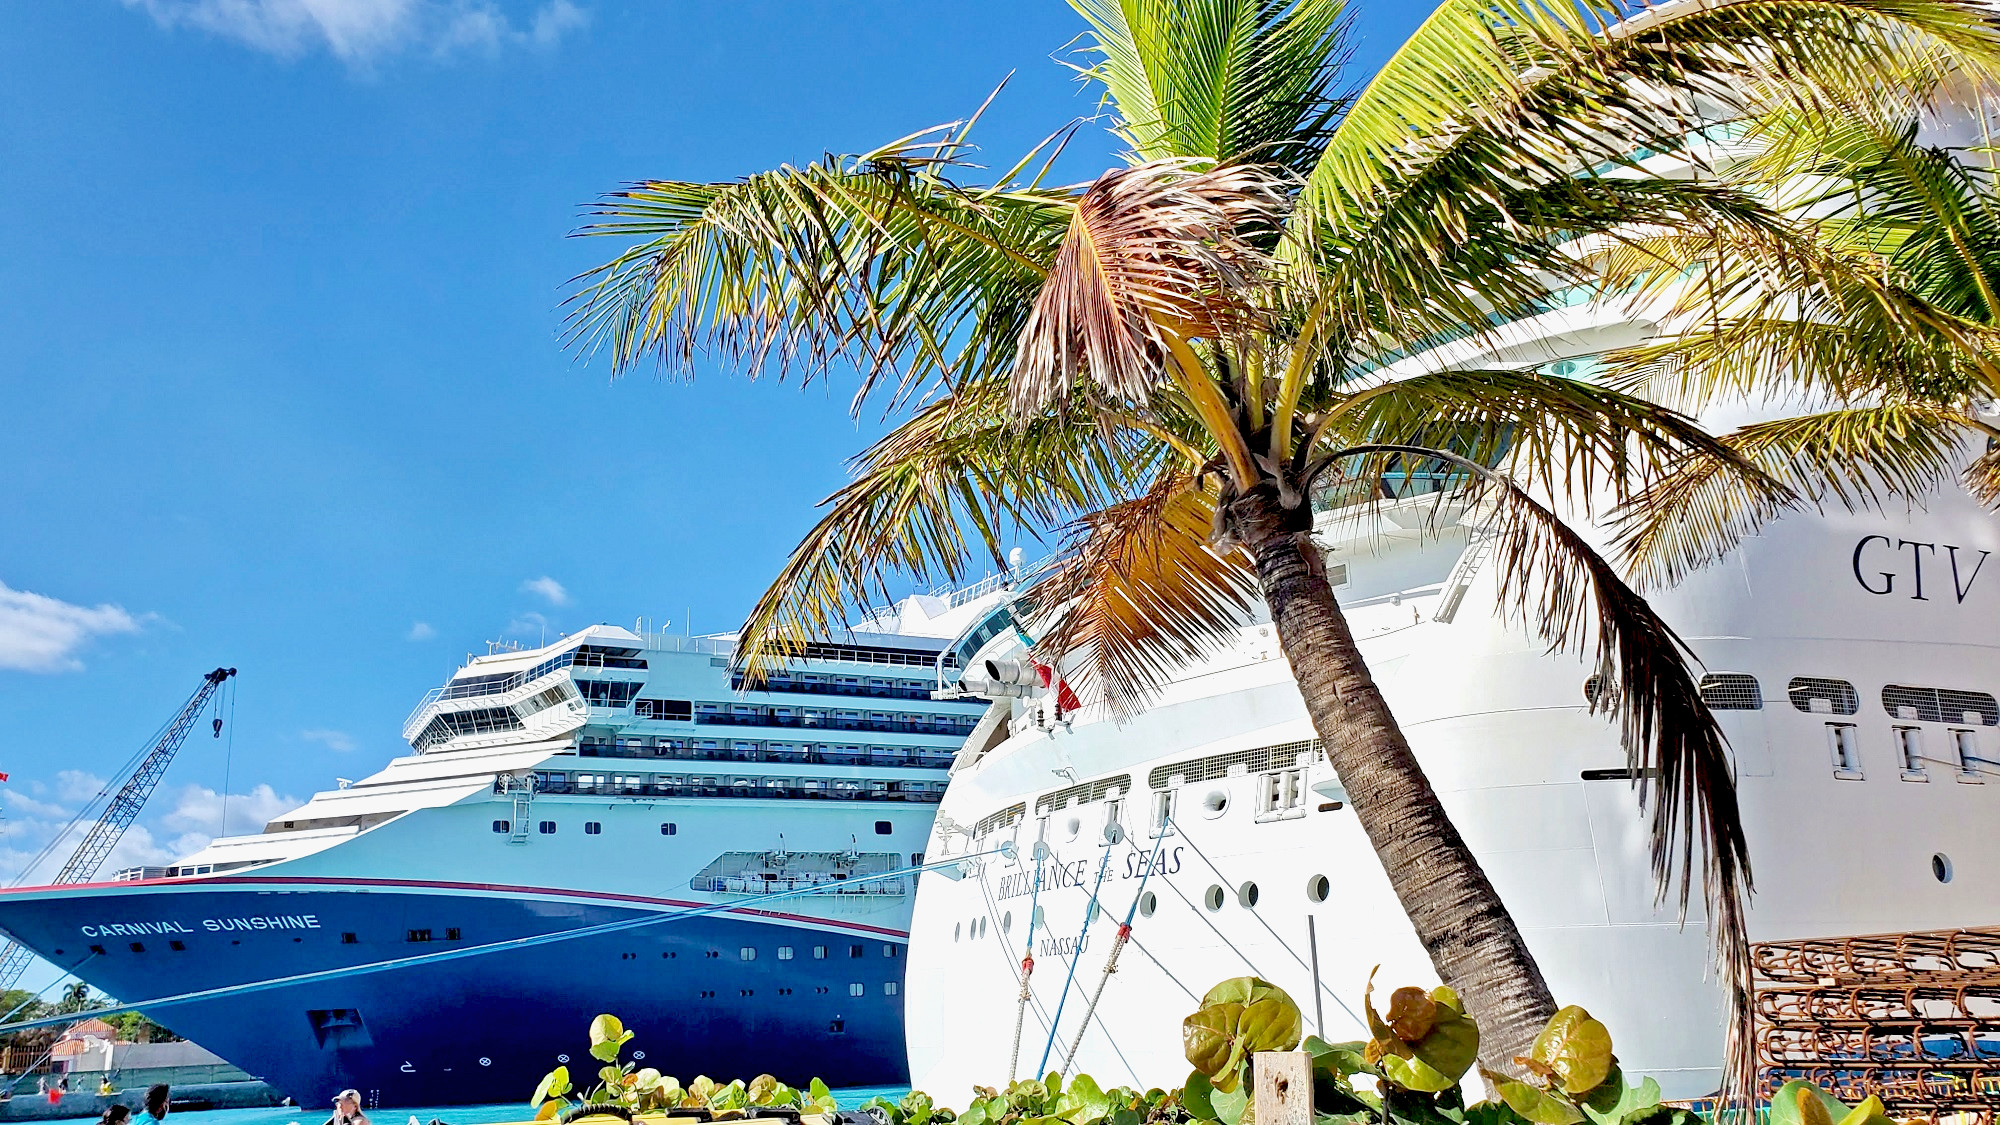 carnival sunshine and grandeur in port at Nassau with palm tree